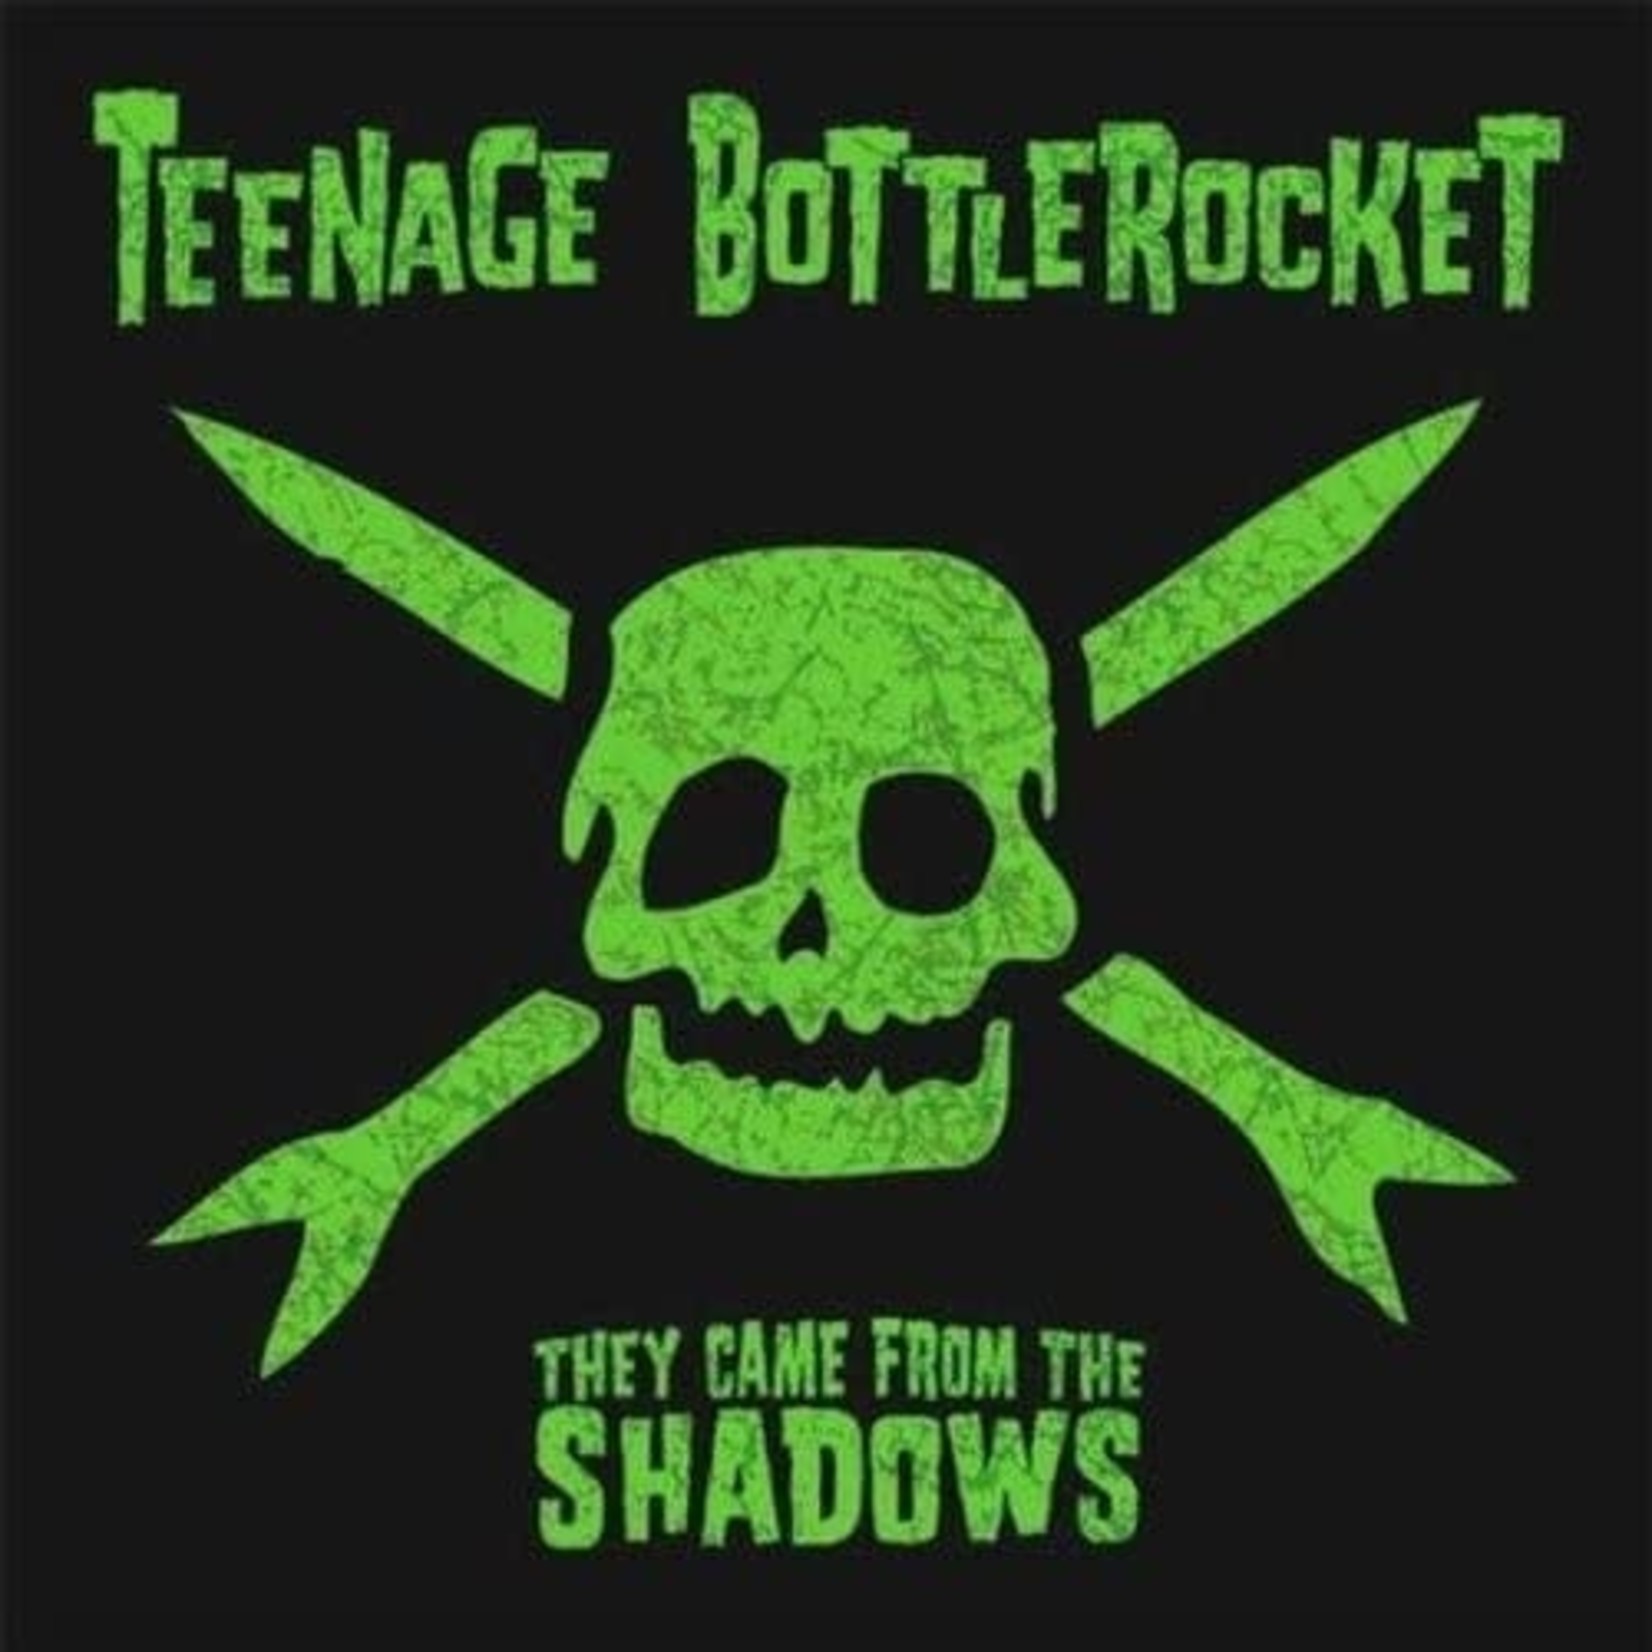 Vinyl Teenage Bottlerocket - They Came from the Shadows